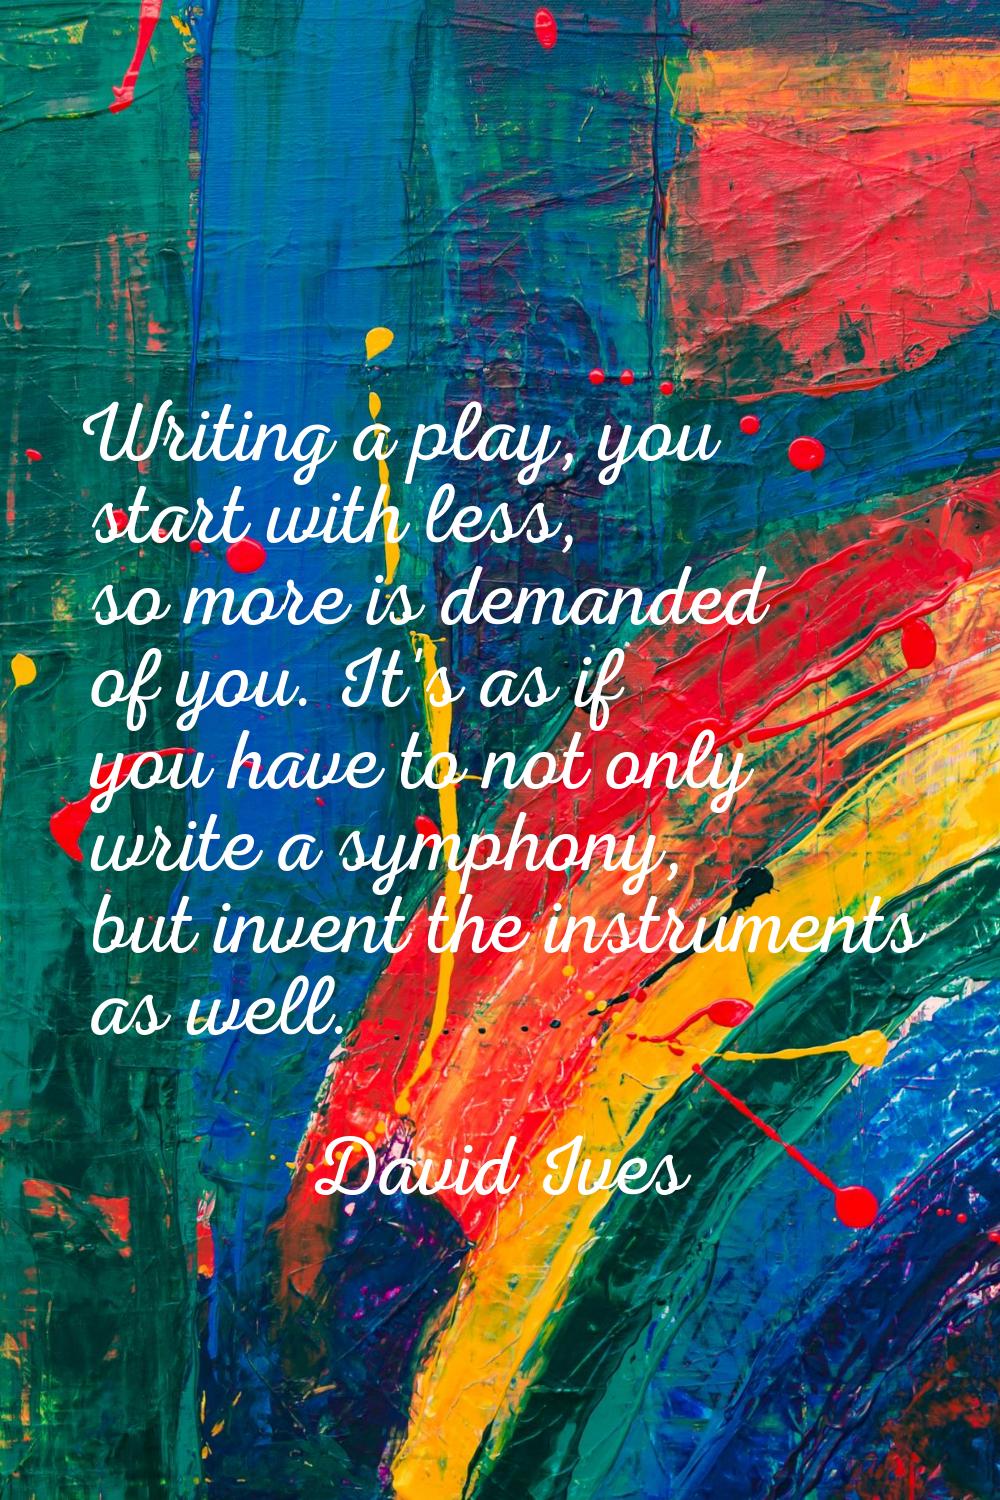 Writing a play, you start with less, so more is demanded of you. It's as if you have to not only wr